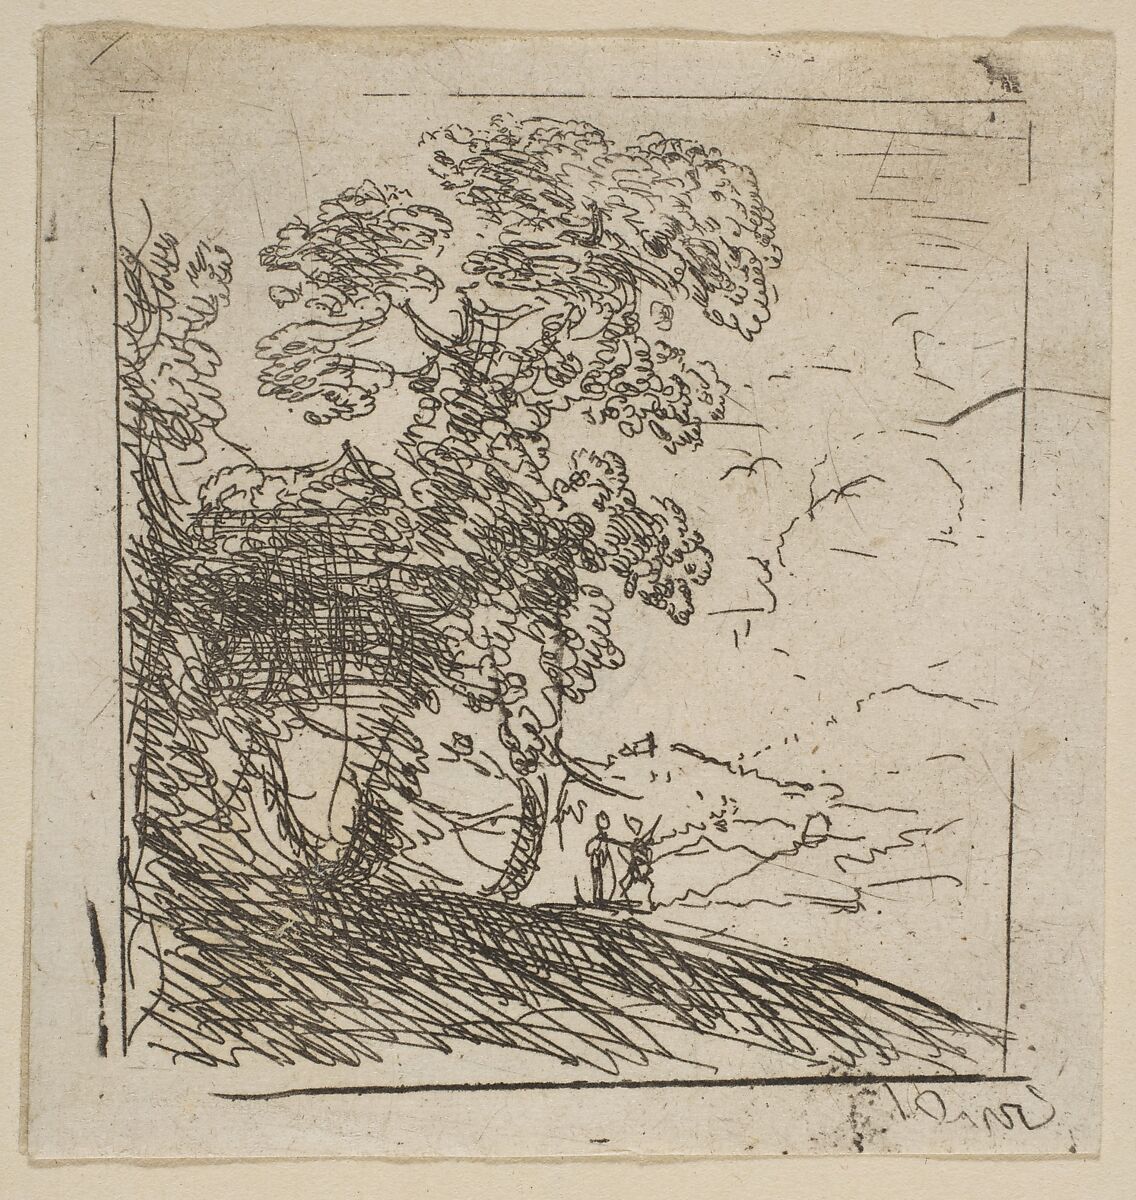 The Two Landscapes (Right Tree), Claude Lorrain (Claude Gellée) (French, Chamagne 1604/5?–1682 Rome), Etching 